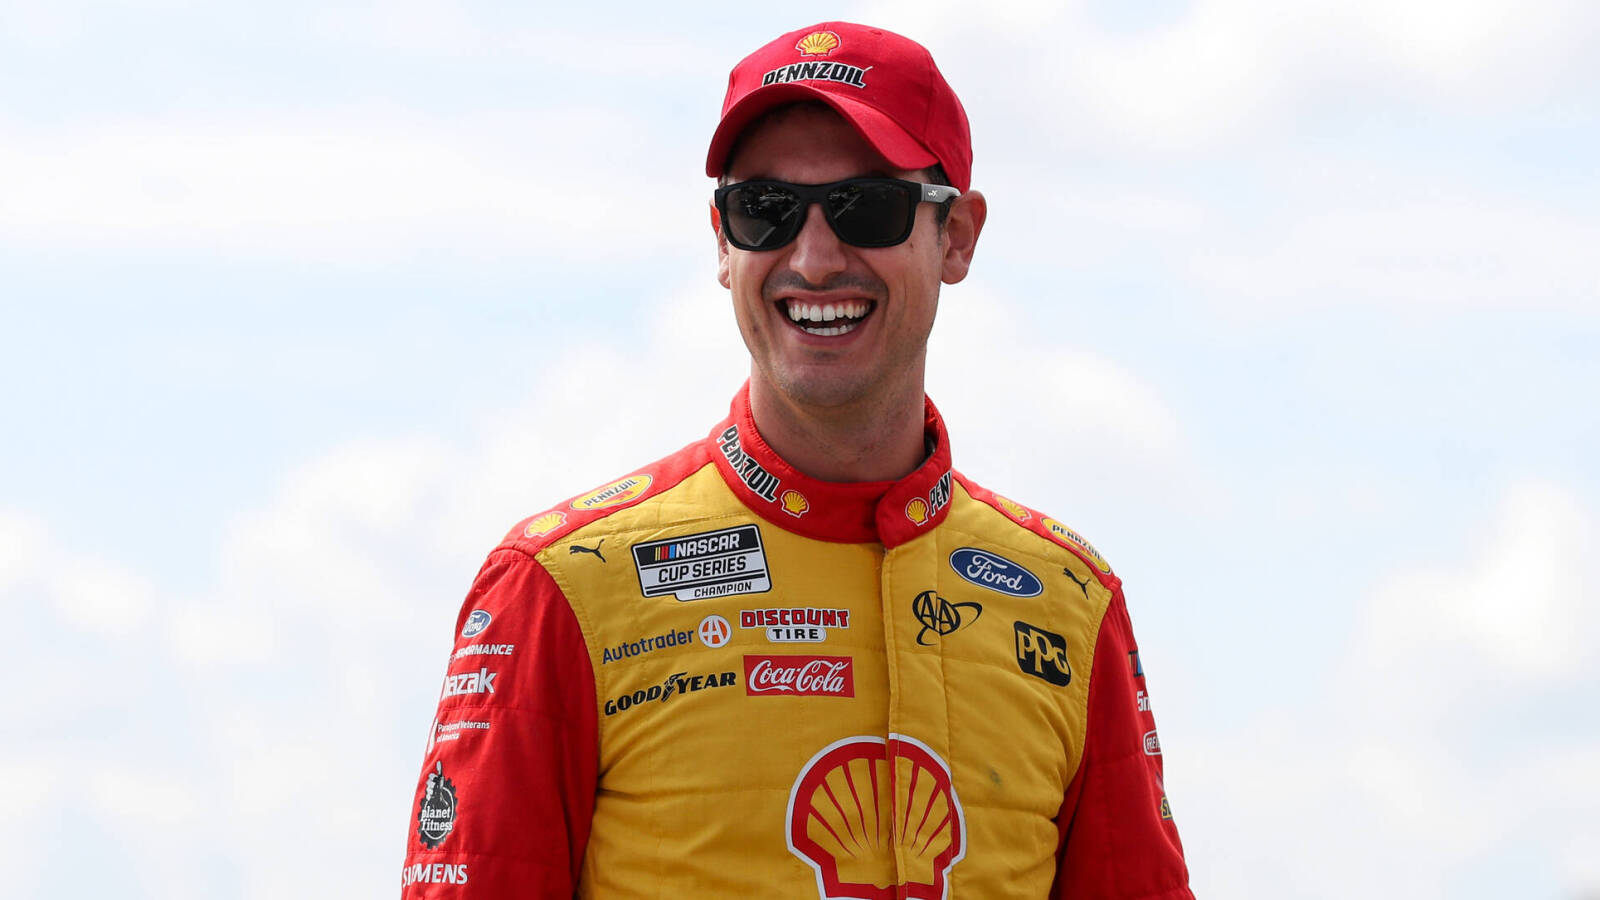 Former NASCAR Cup series champion Joey Logano agrees to long-term contract extension with Team Penske